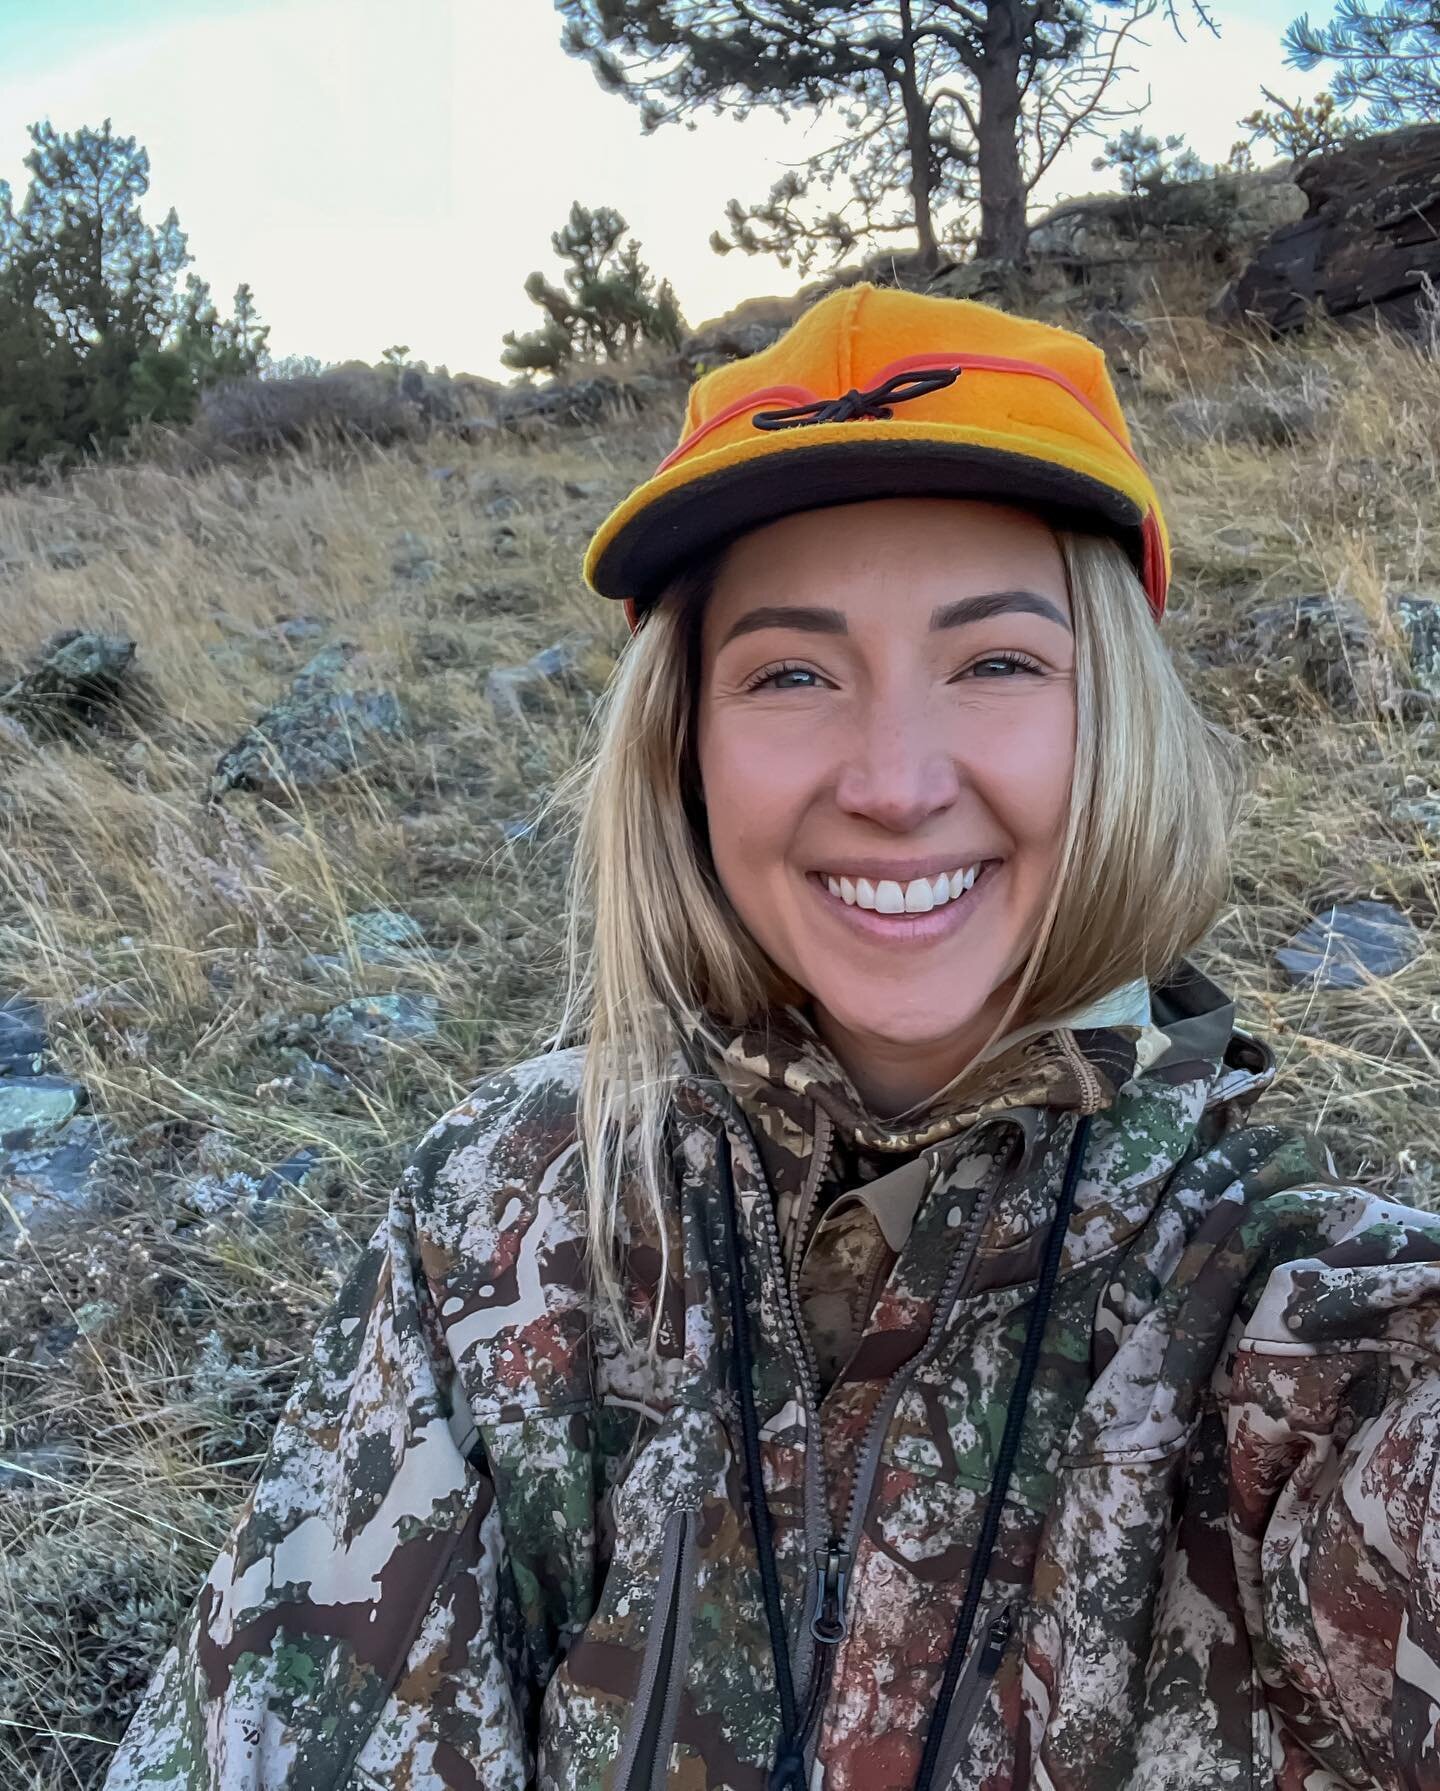 Wyoming part one&hellip;😍

Sunrise, hiking, seeing Elk up close, camo + Marc &gt;&gt;&gt;&gt;&gt;&gt;

This place is beautiful. Who knew I&rsquo;d love hunting with @marc_rodrigue so much&hellip;it&rsquo;s been beyond fun! 🦌

#wyoming #hunting #mul